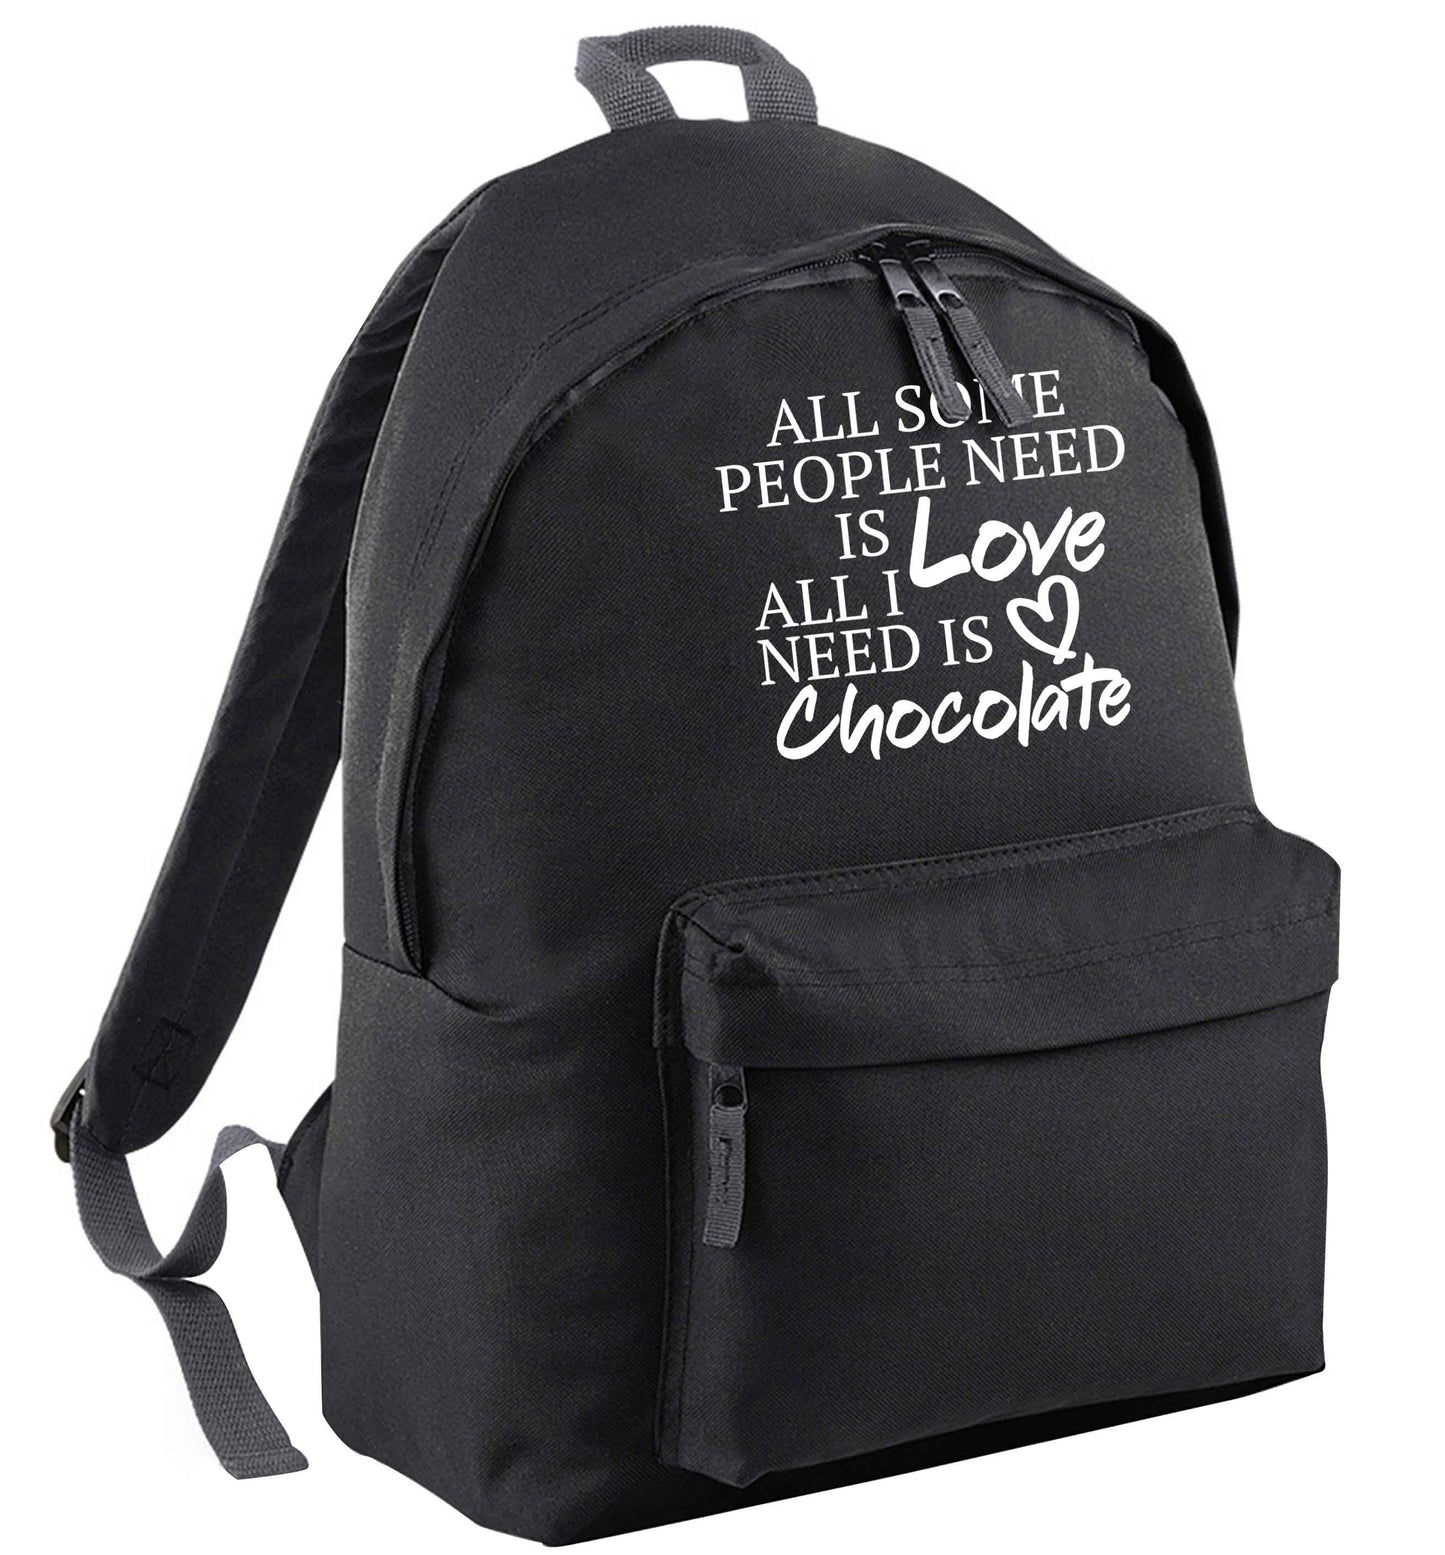 All some people need is love all I need is chocolate | Children's backpack